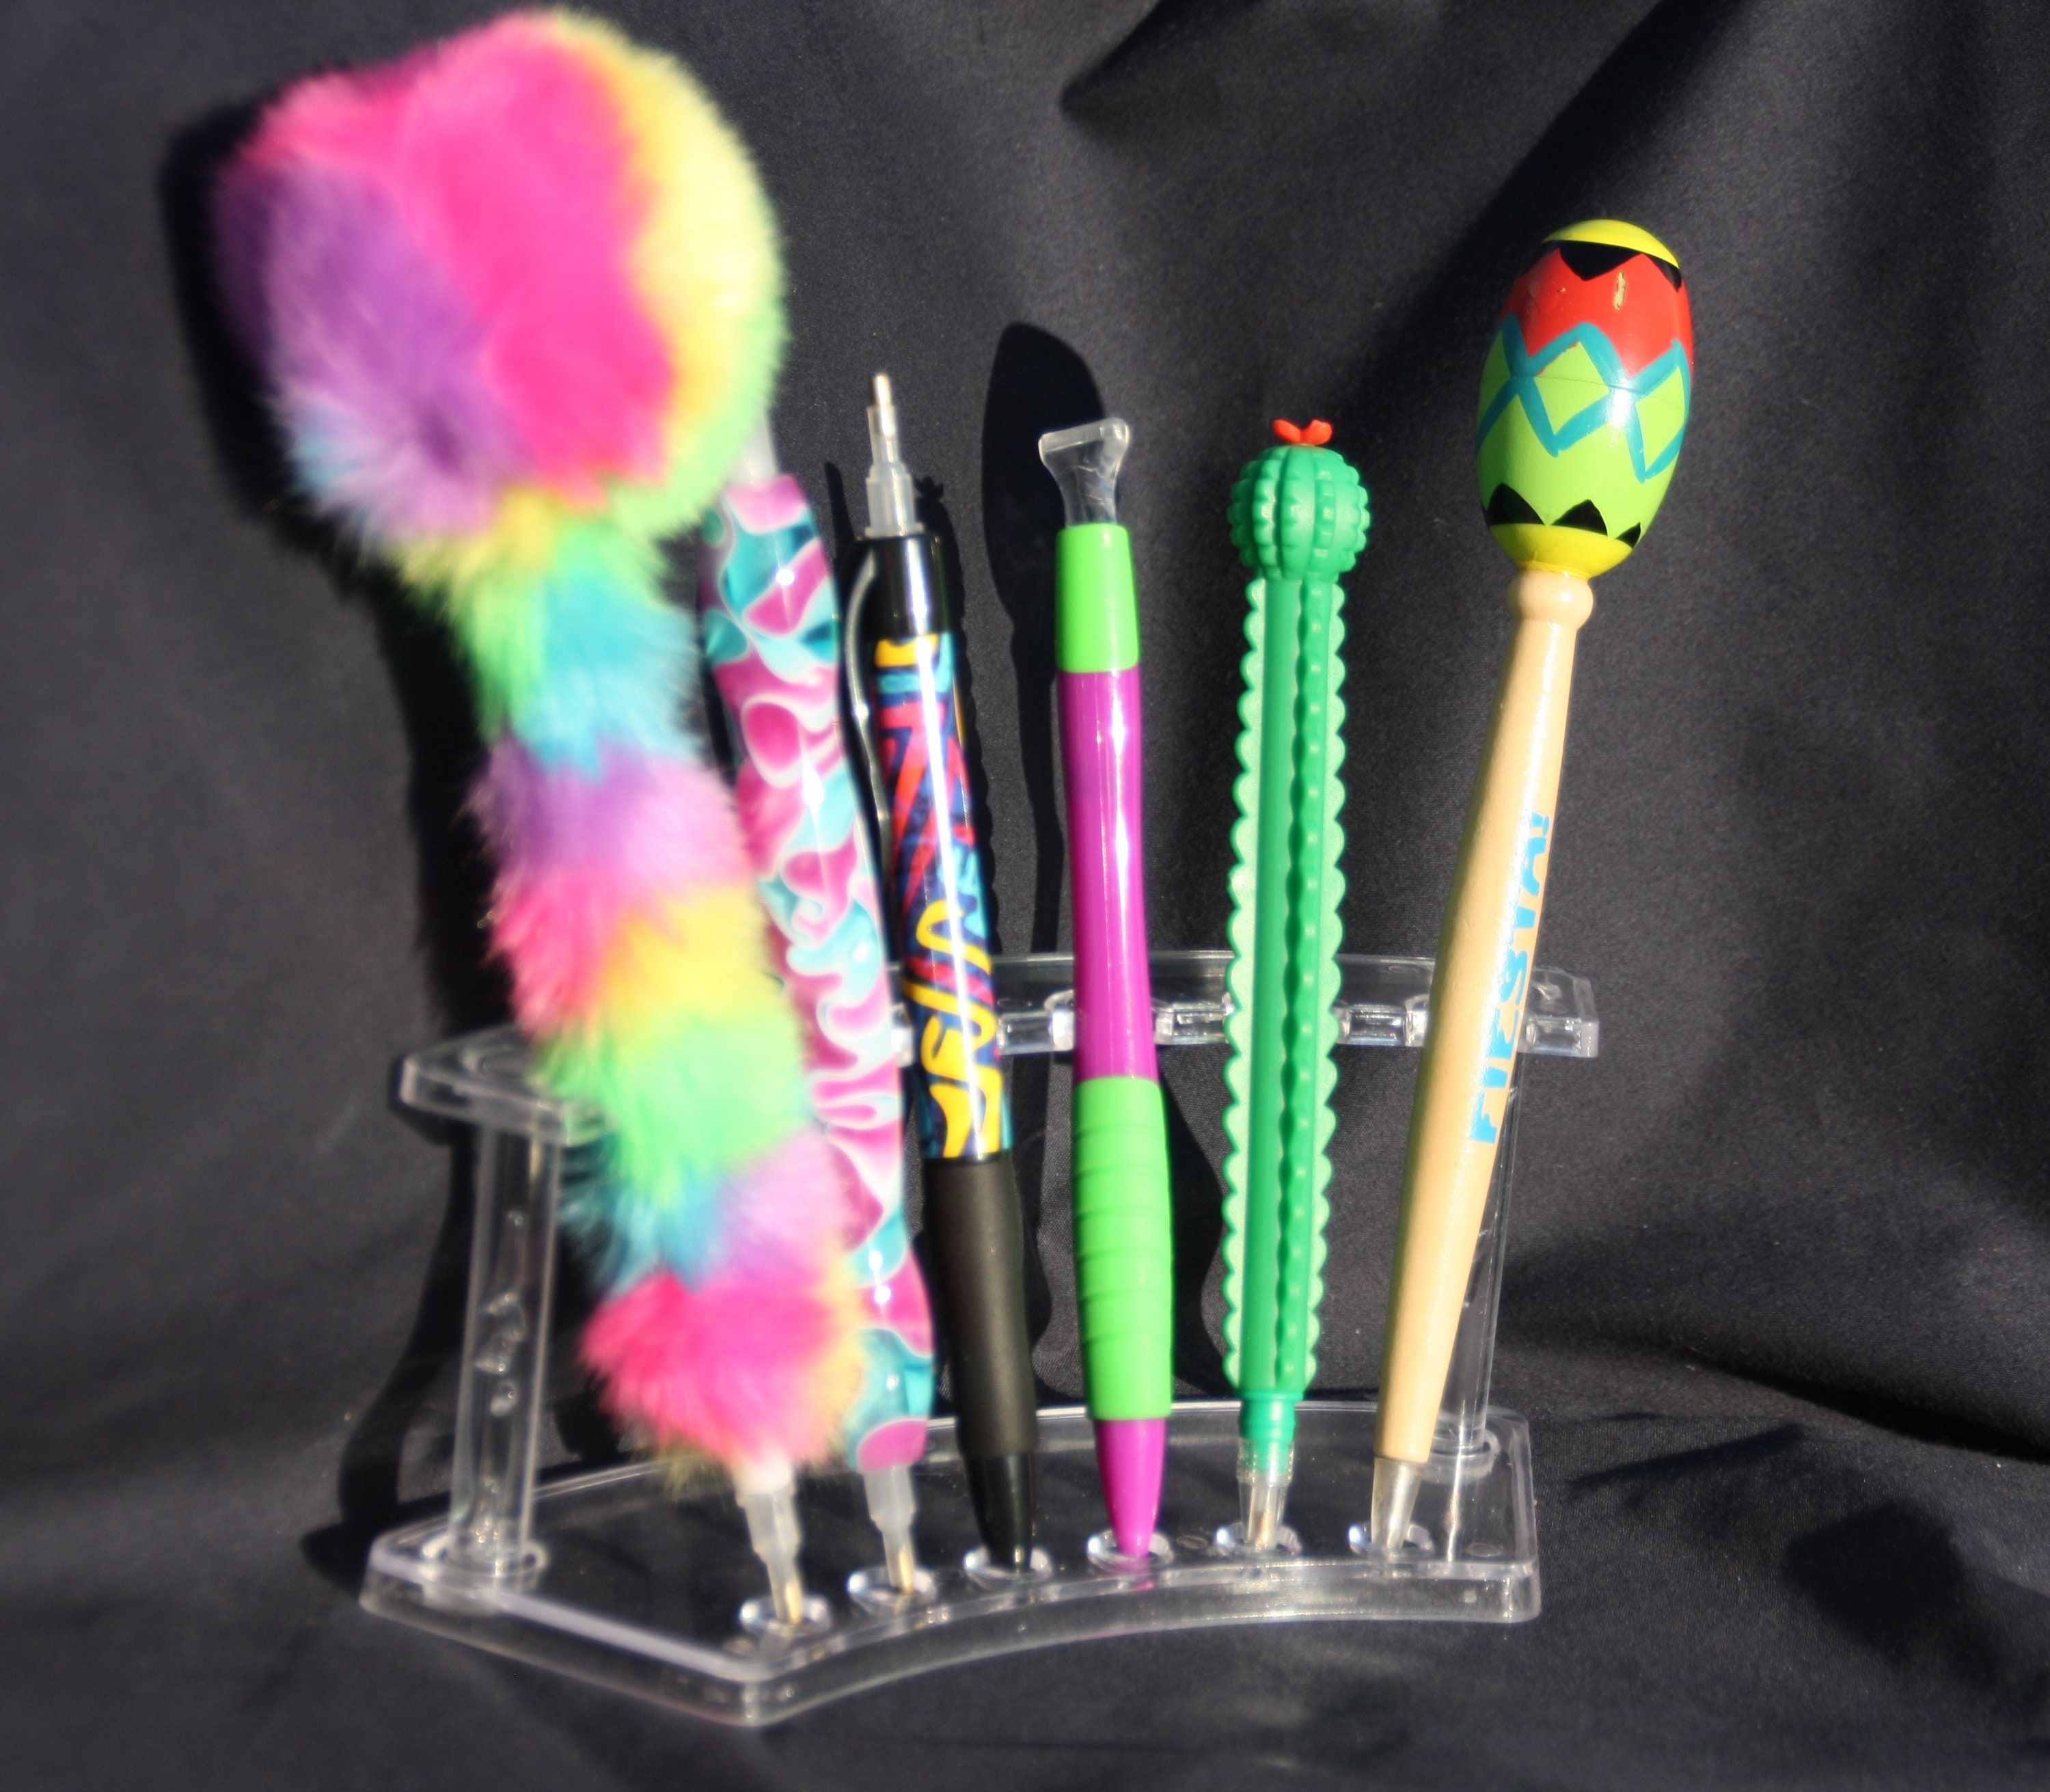 3D Printed Pen Stand Rainbow Ombr\u00e9 Pen Stand Single Pen Stand Pen Stand Diamond Art Pen Holder Diamond Painting Pen Stand